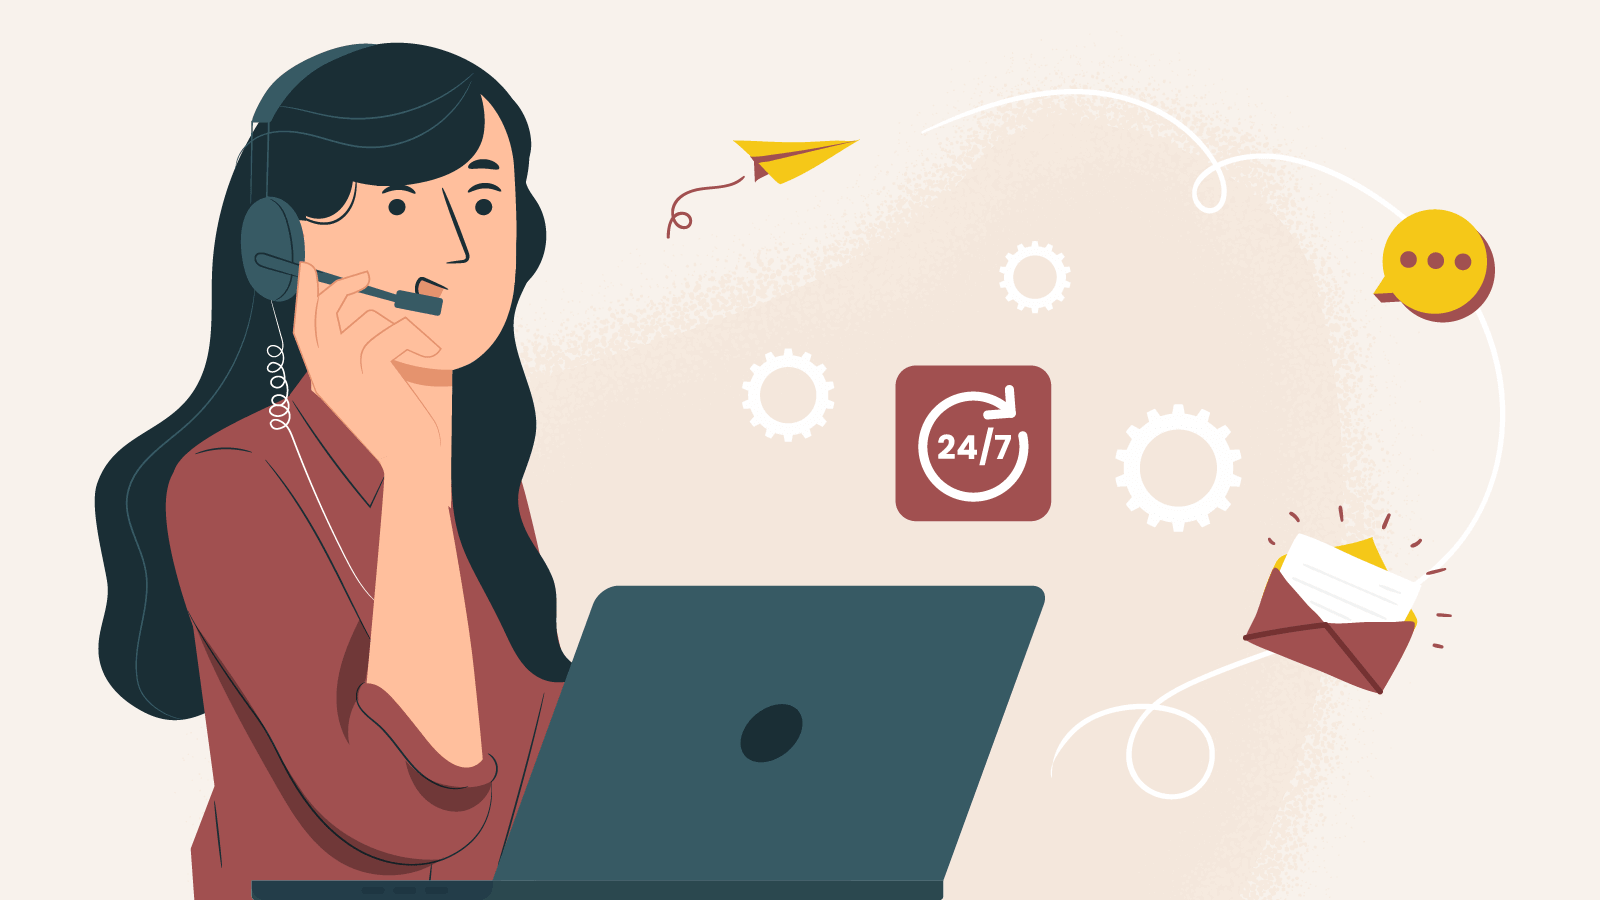 Find out how to reach customer support